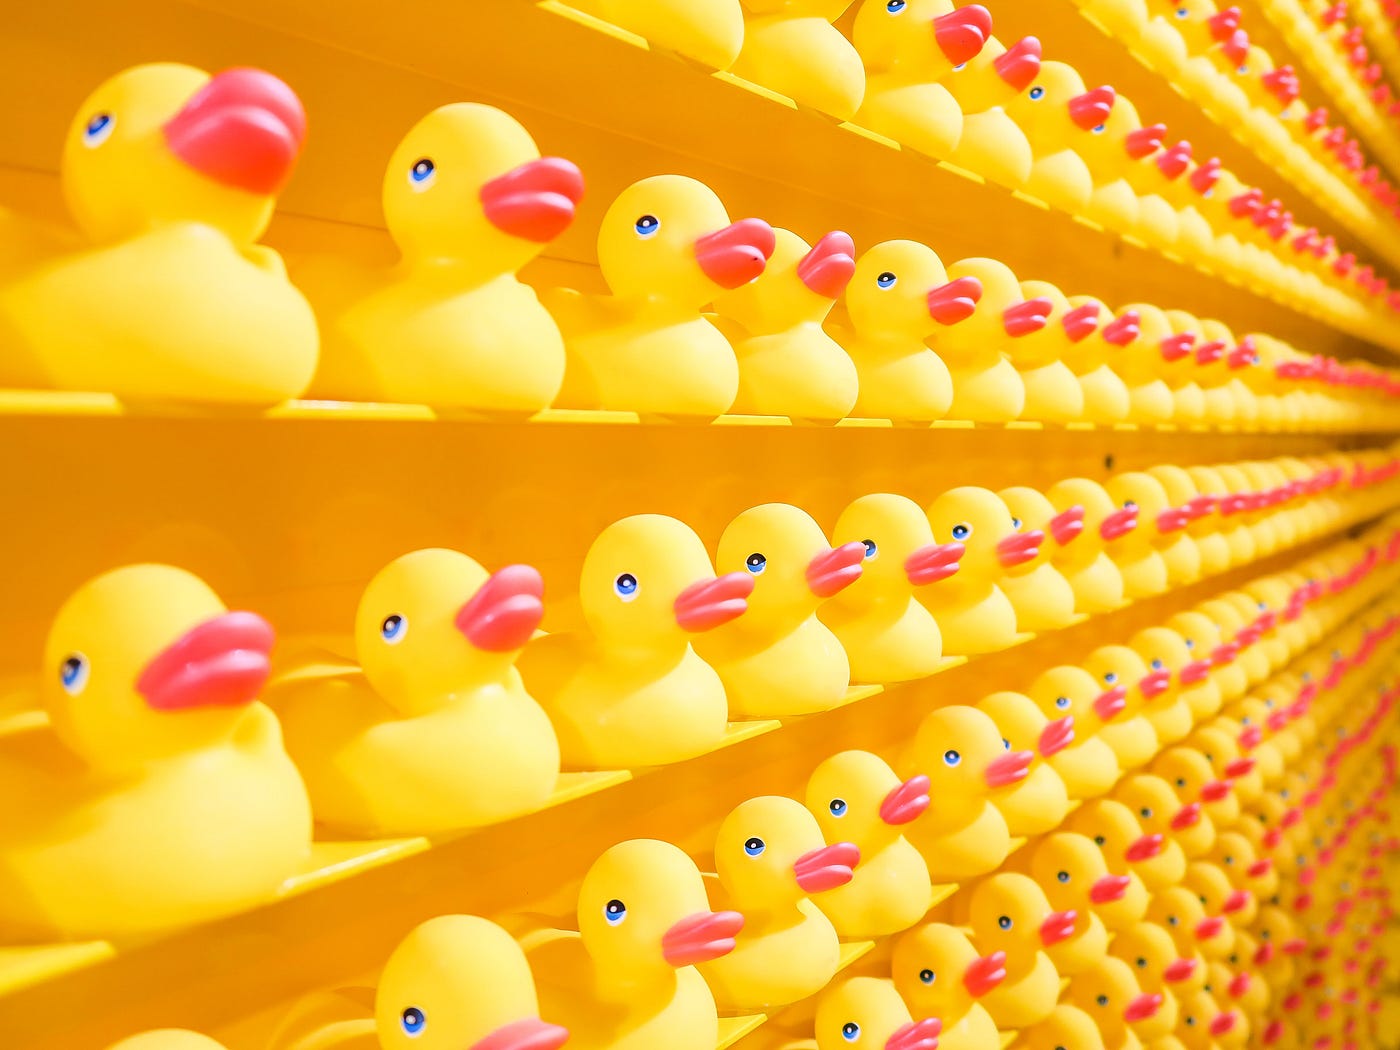 Why You Should Adopt a Rubber Ducky, by Karen McClellan